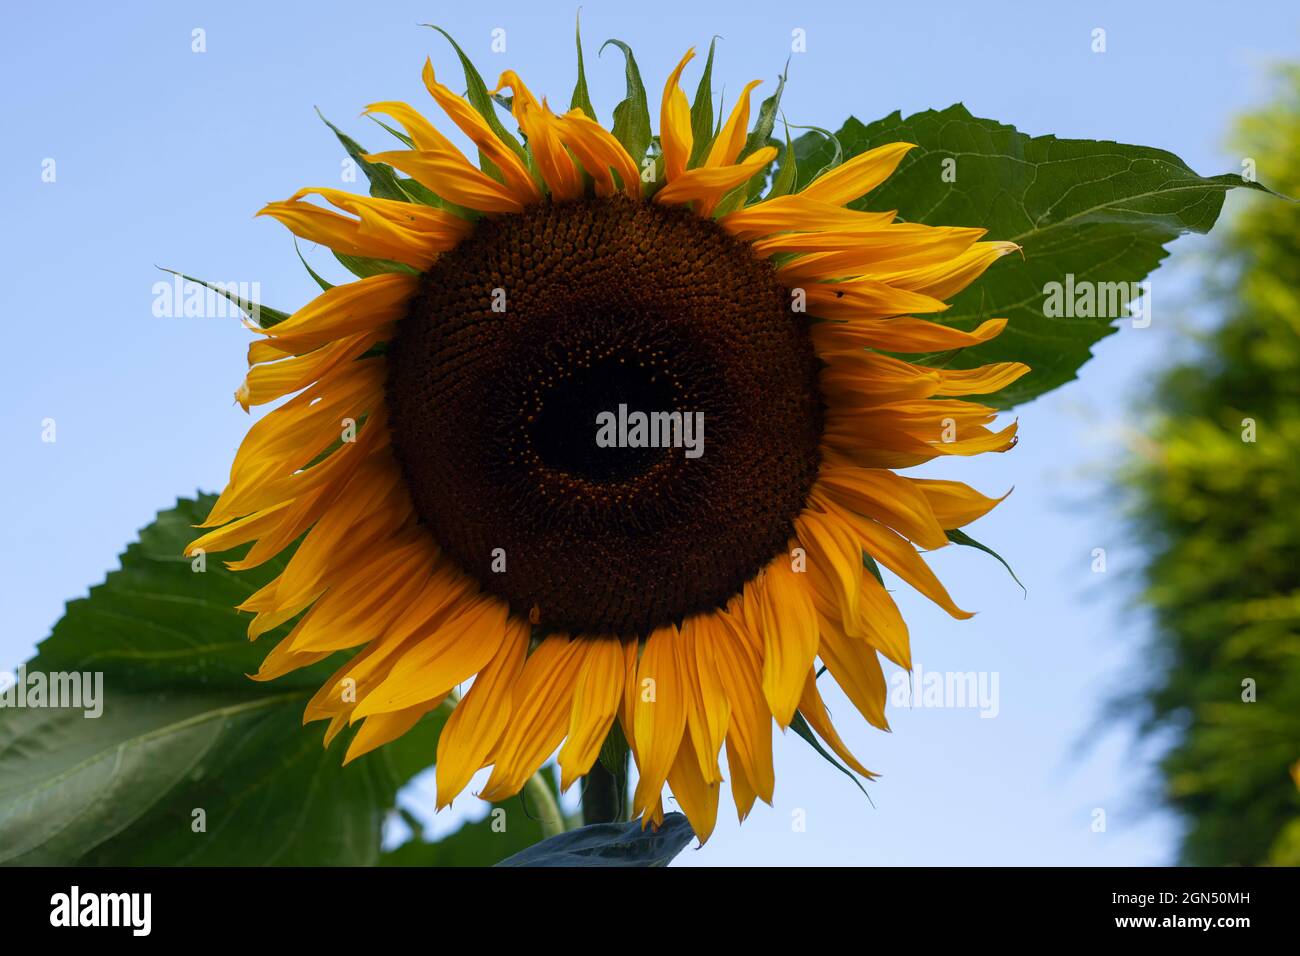 Sunflower 'Helianthus' in bloom against a clear blue sky Stock Photo